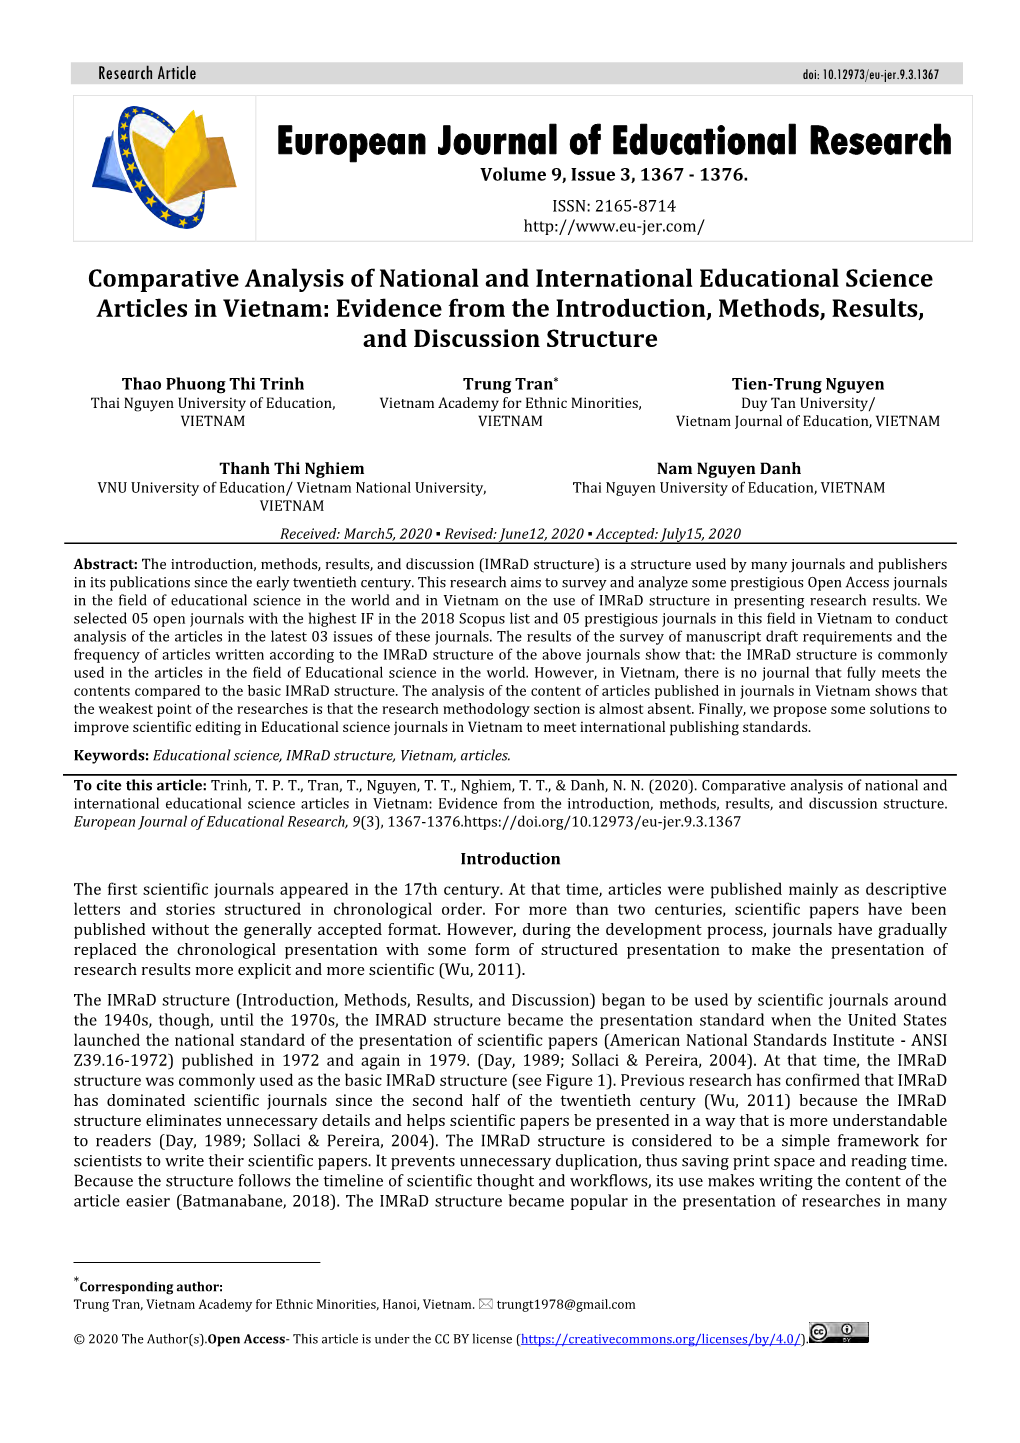 Comparative Analysis of National and International Educational Science